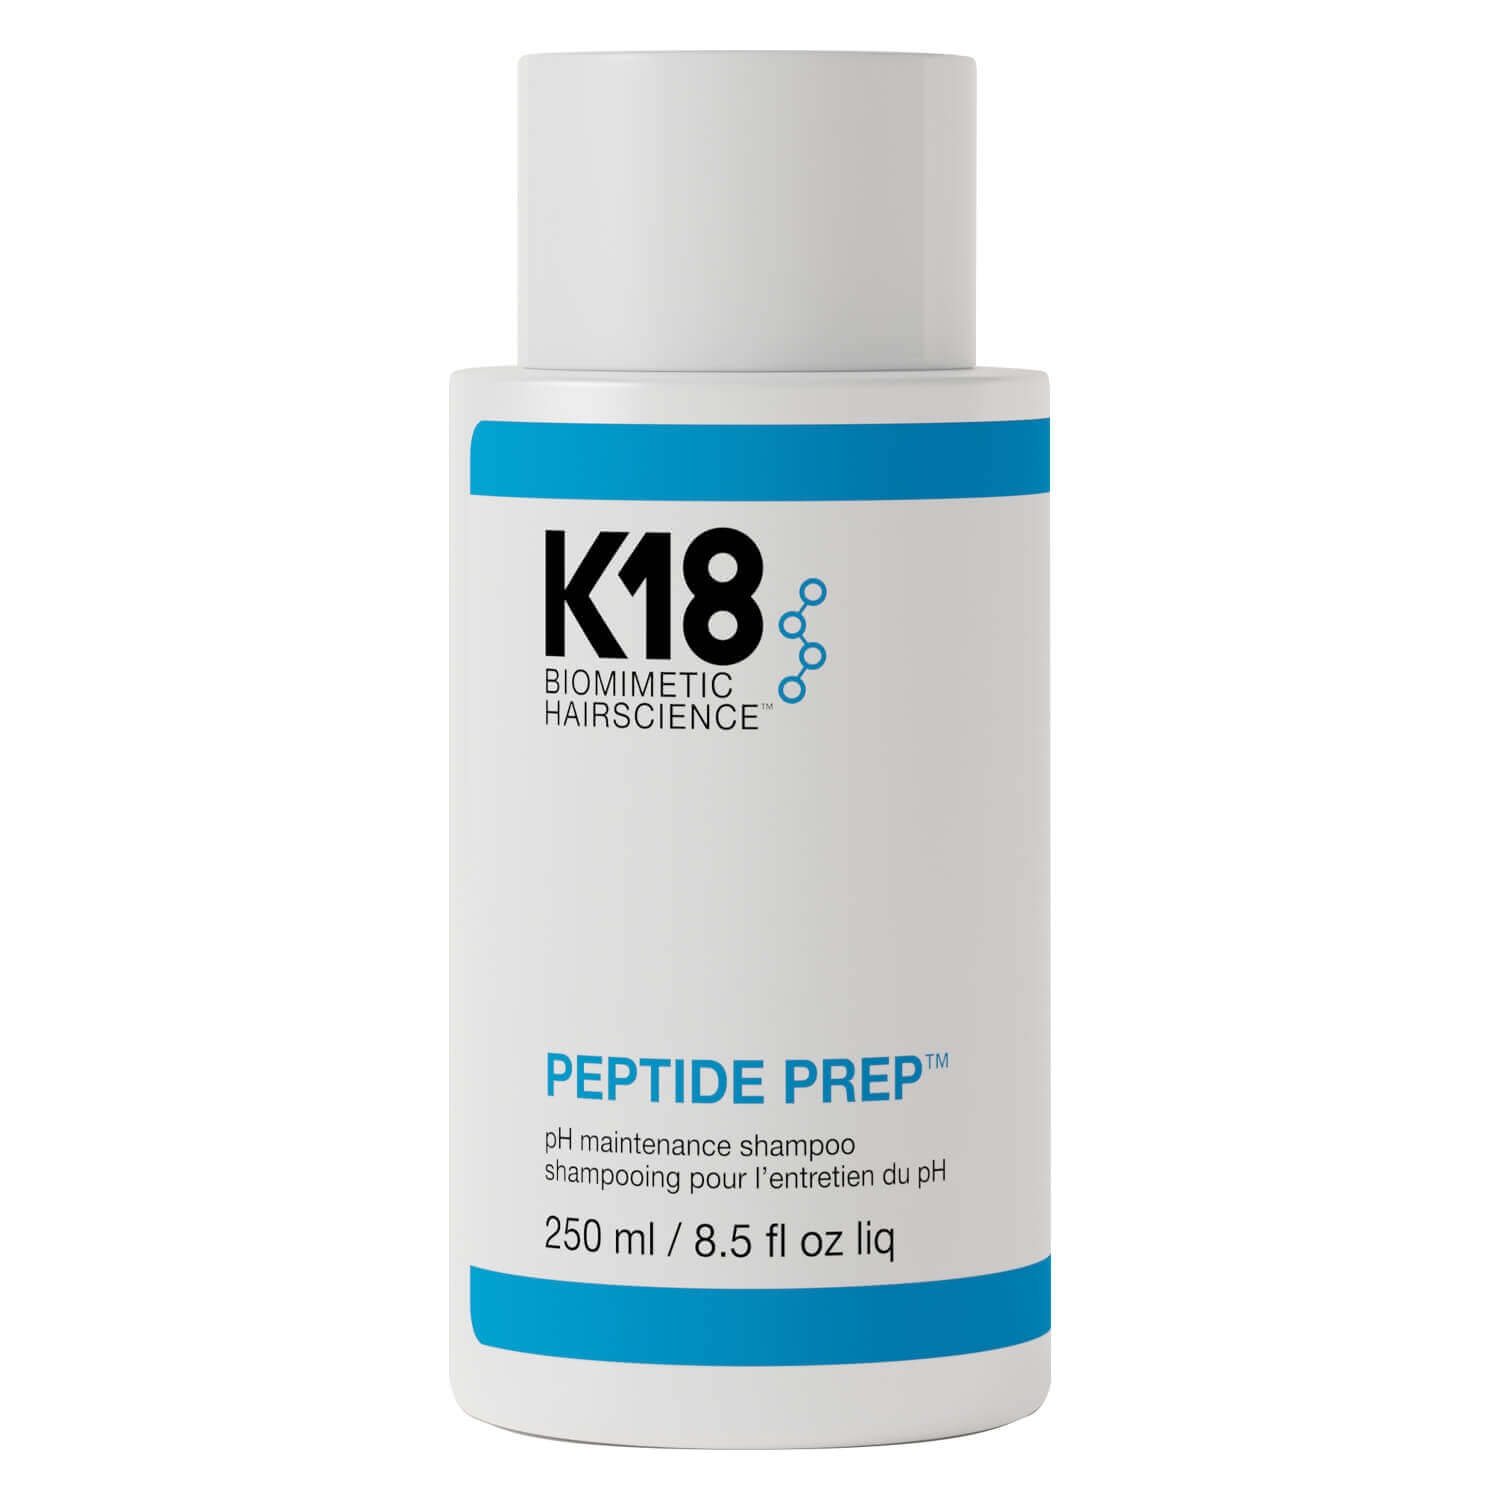 Product image from K18 Biomimetic Hairscience - Peptide Prep pH Maintenance Shampoo